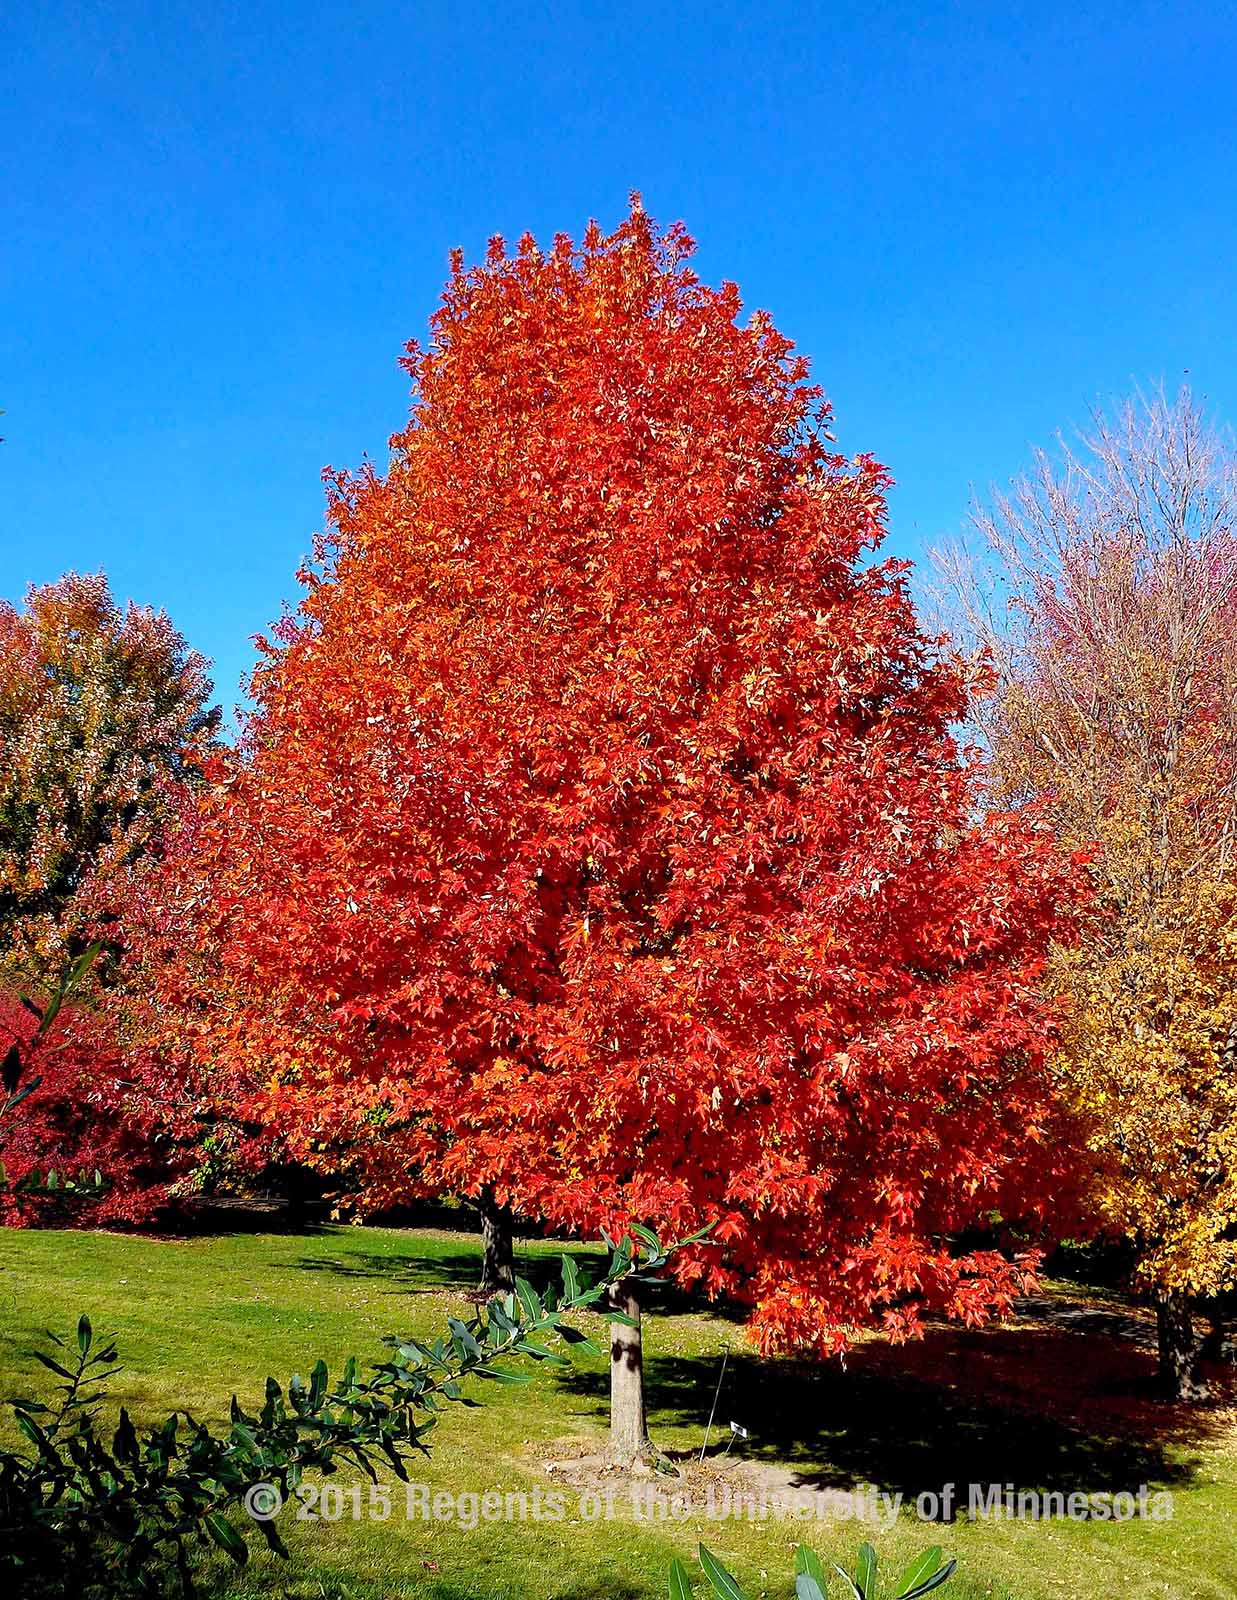 mature sugar maple trees for sale